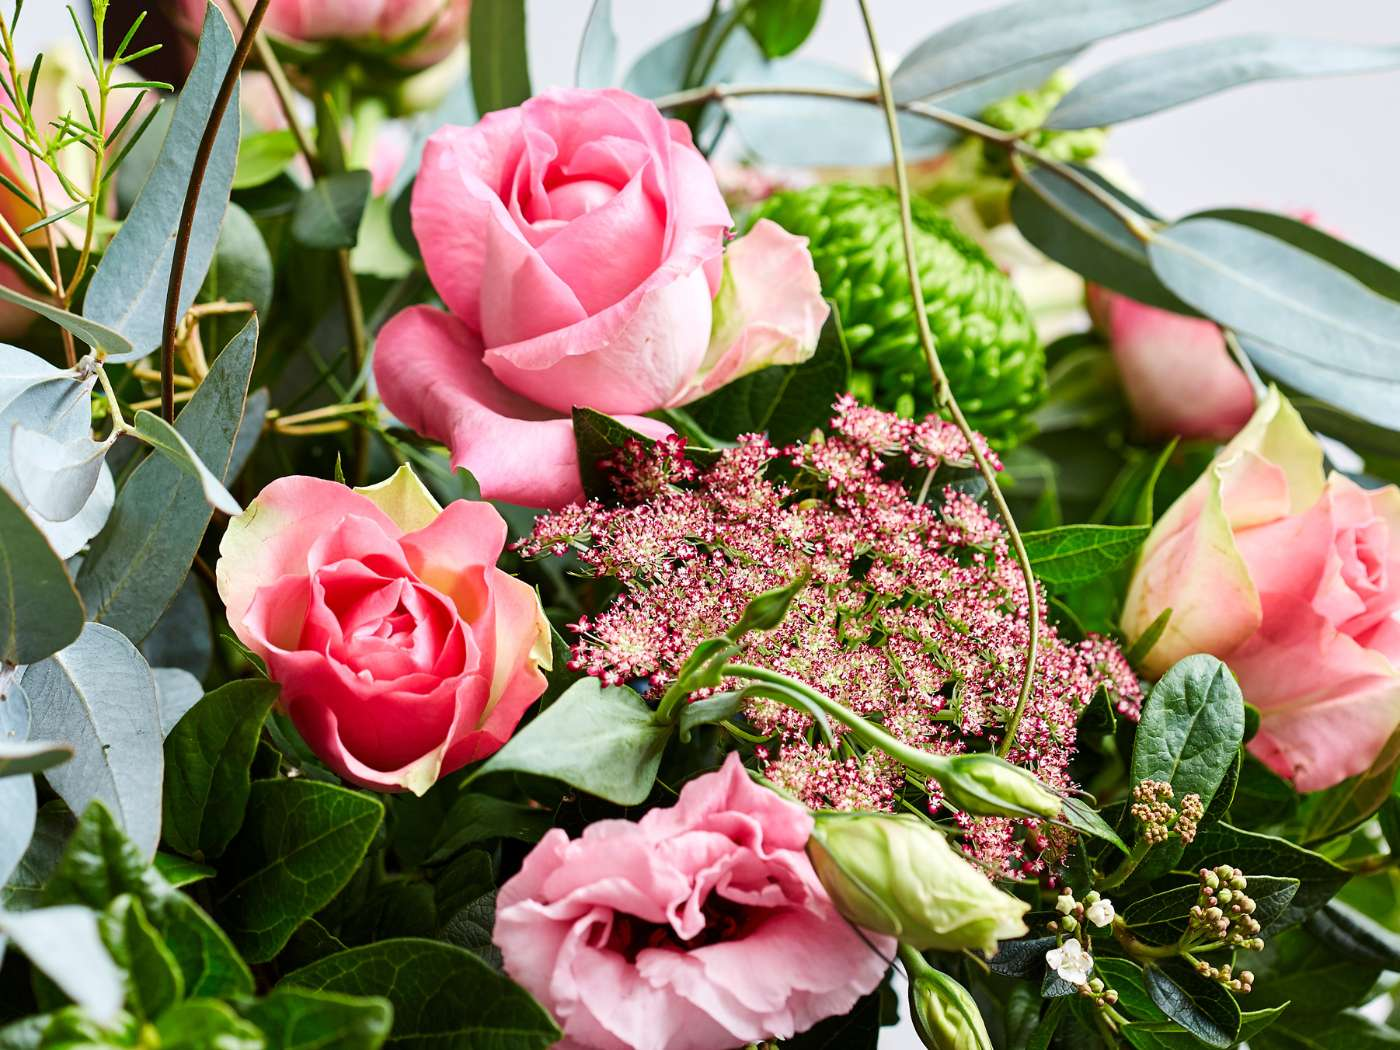 Close-up of a vibrant flower arrangement with pink roses, green foliage, and delicate pink blossoms, part of the Fabulous Flowers and Gifts company collection.